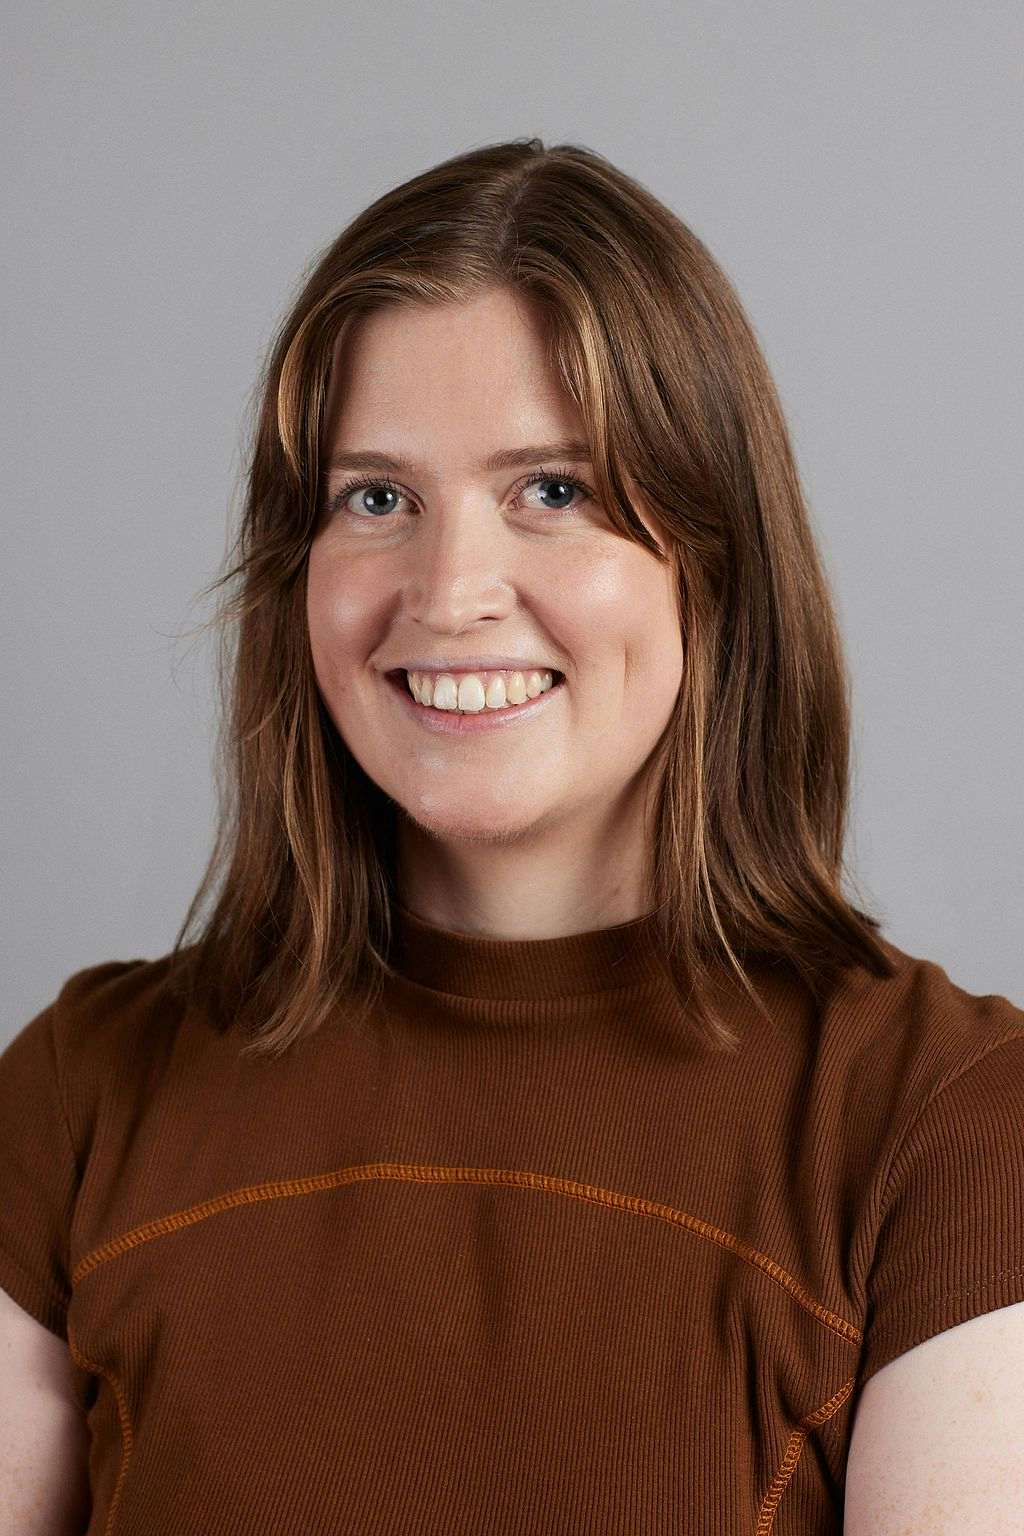 Headshot of Eleanor smiling and wearing a brown shirt.